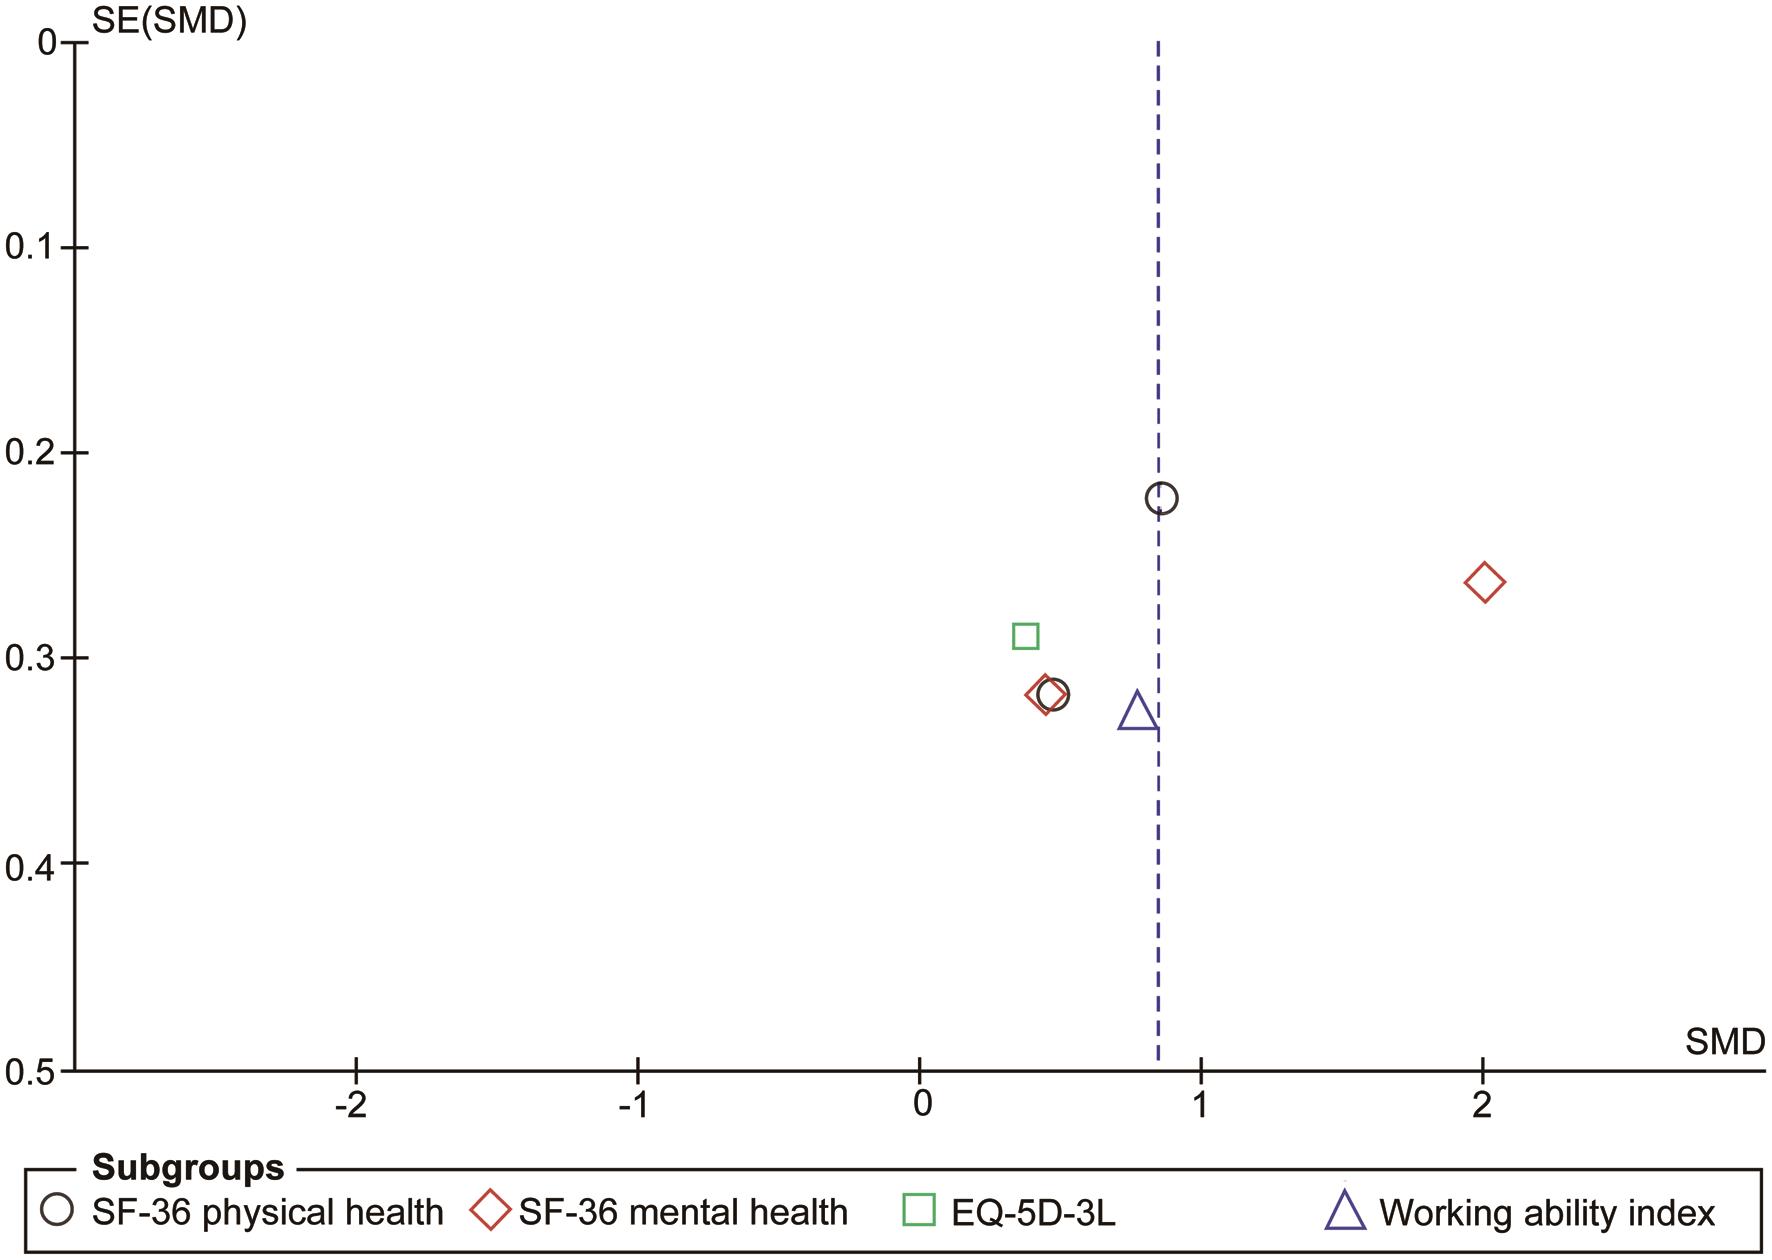 Funnel plot for health-related quality of life and working ability.